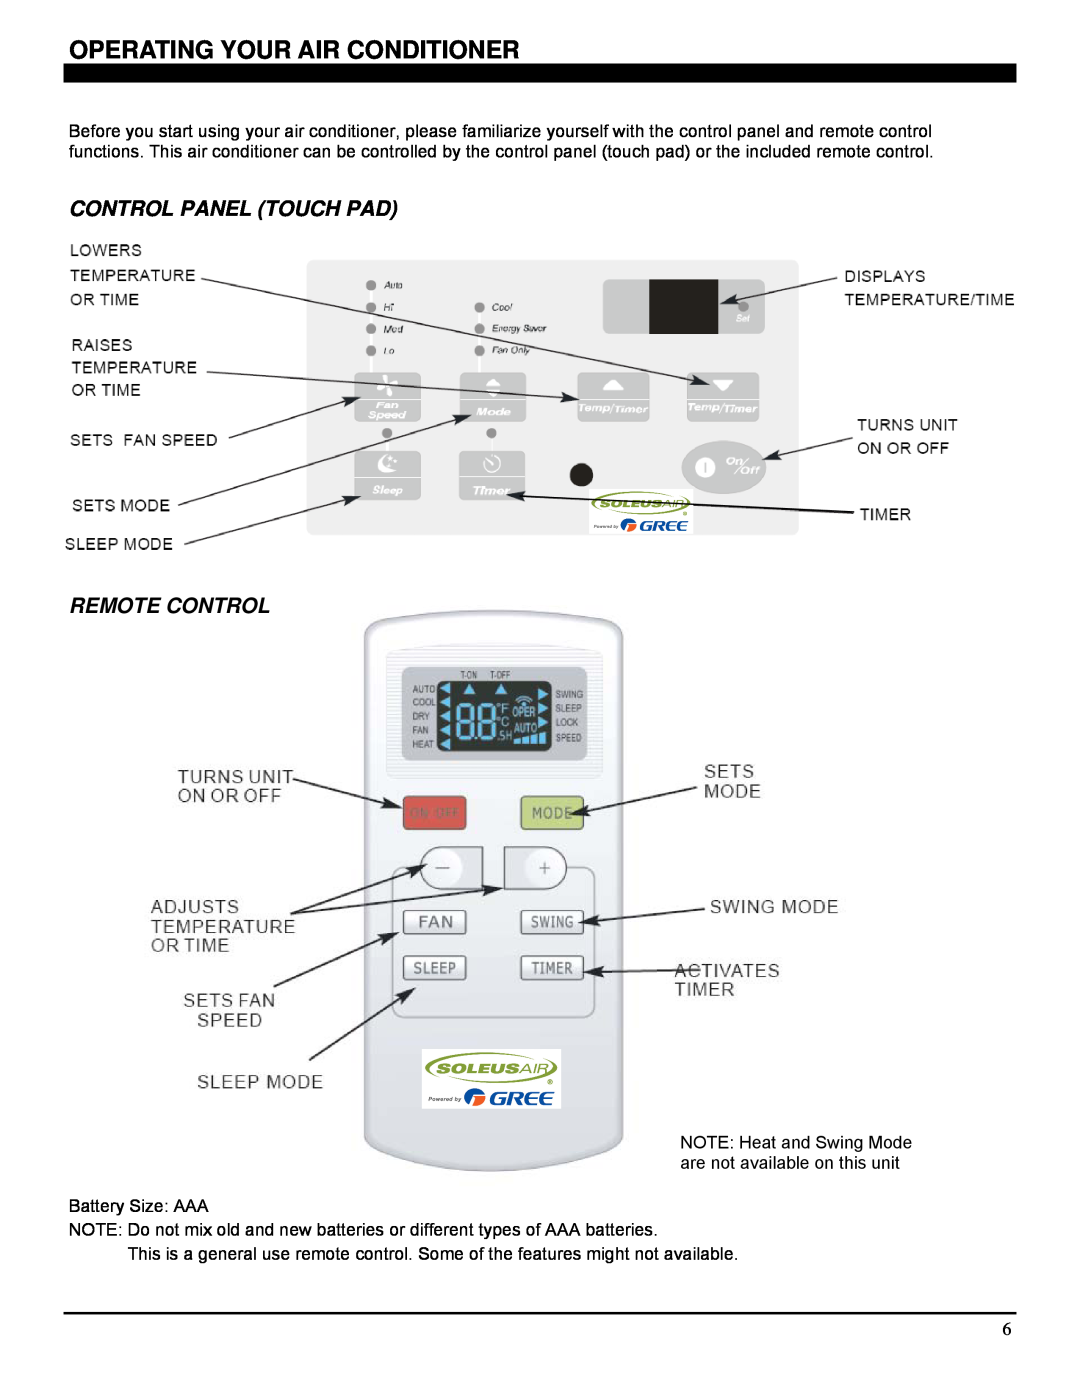 Soleus Air SG-TTW-12ESE operating instructions Operating Your Air Conditioner, Control Panel Touch Pad Remote Control 